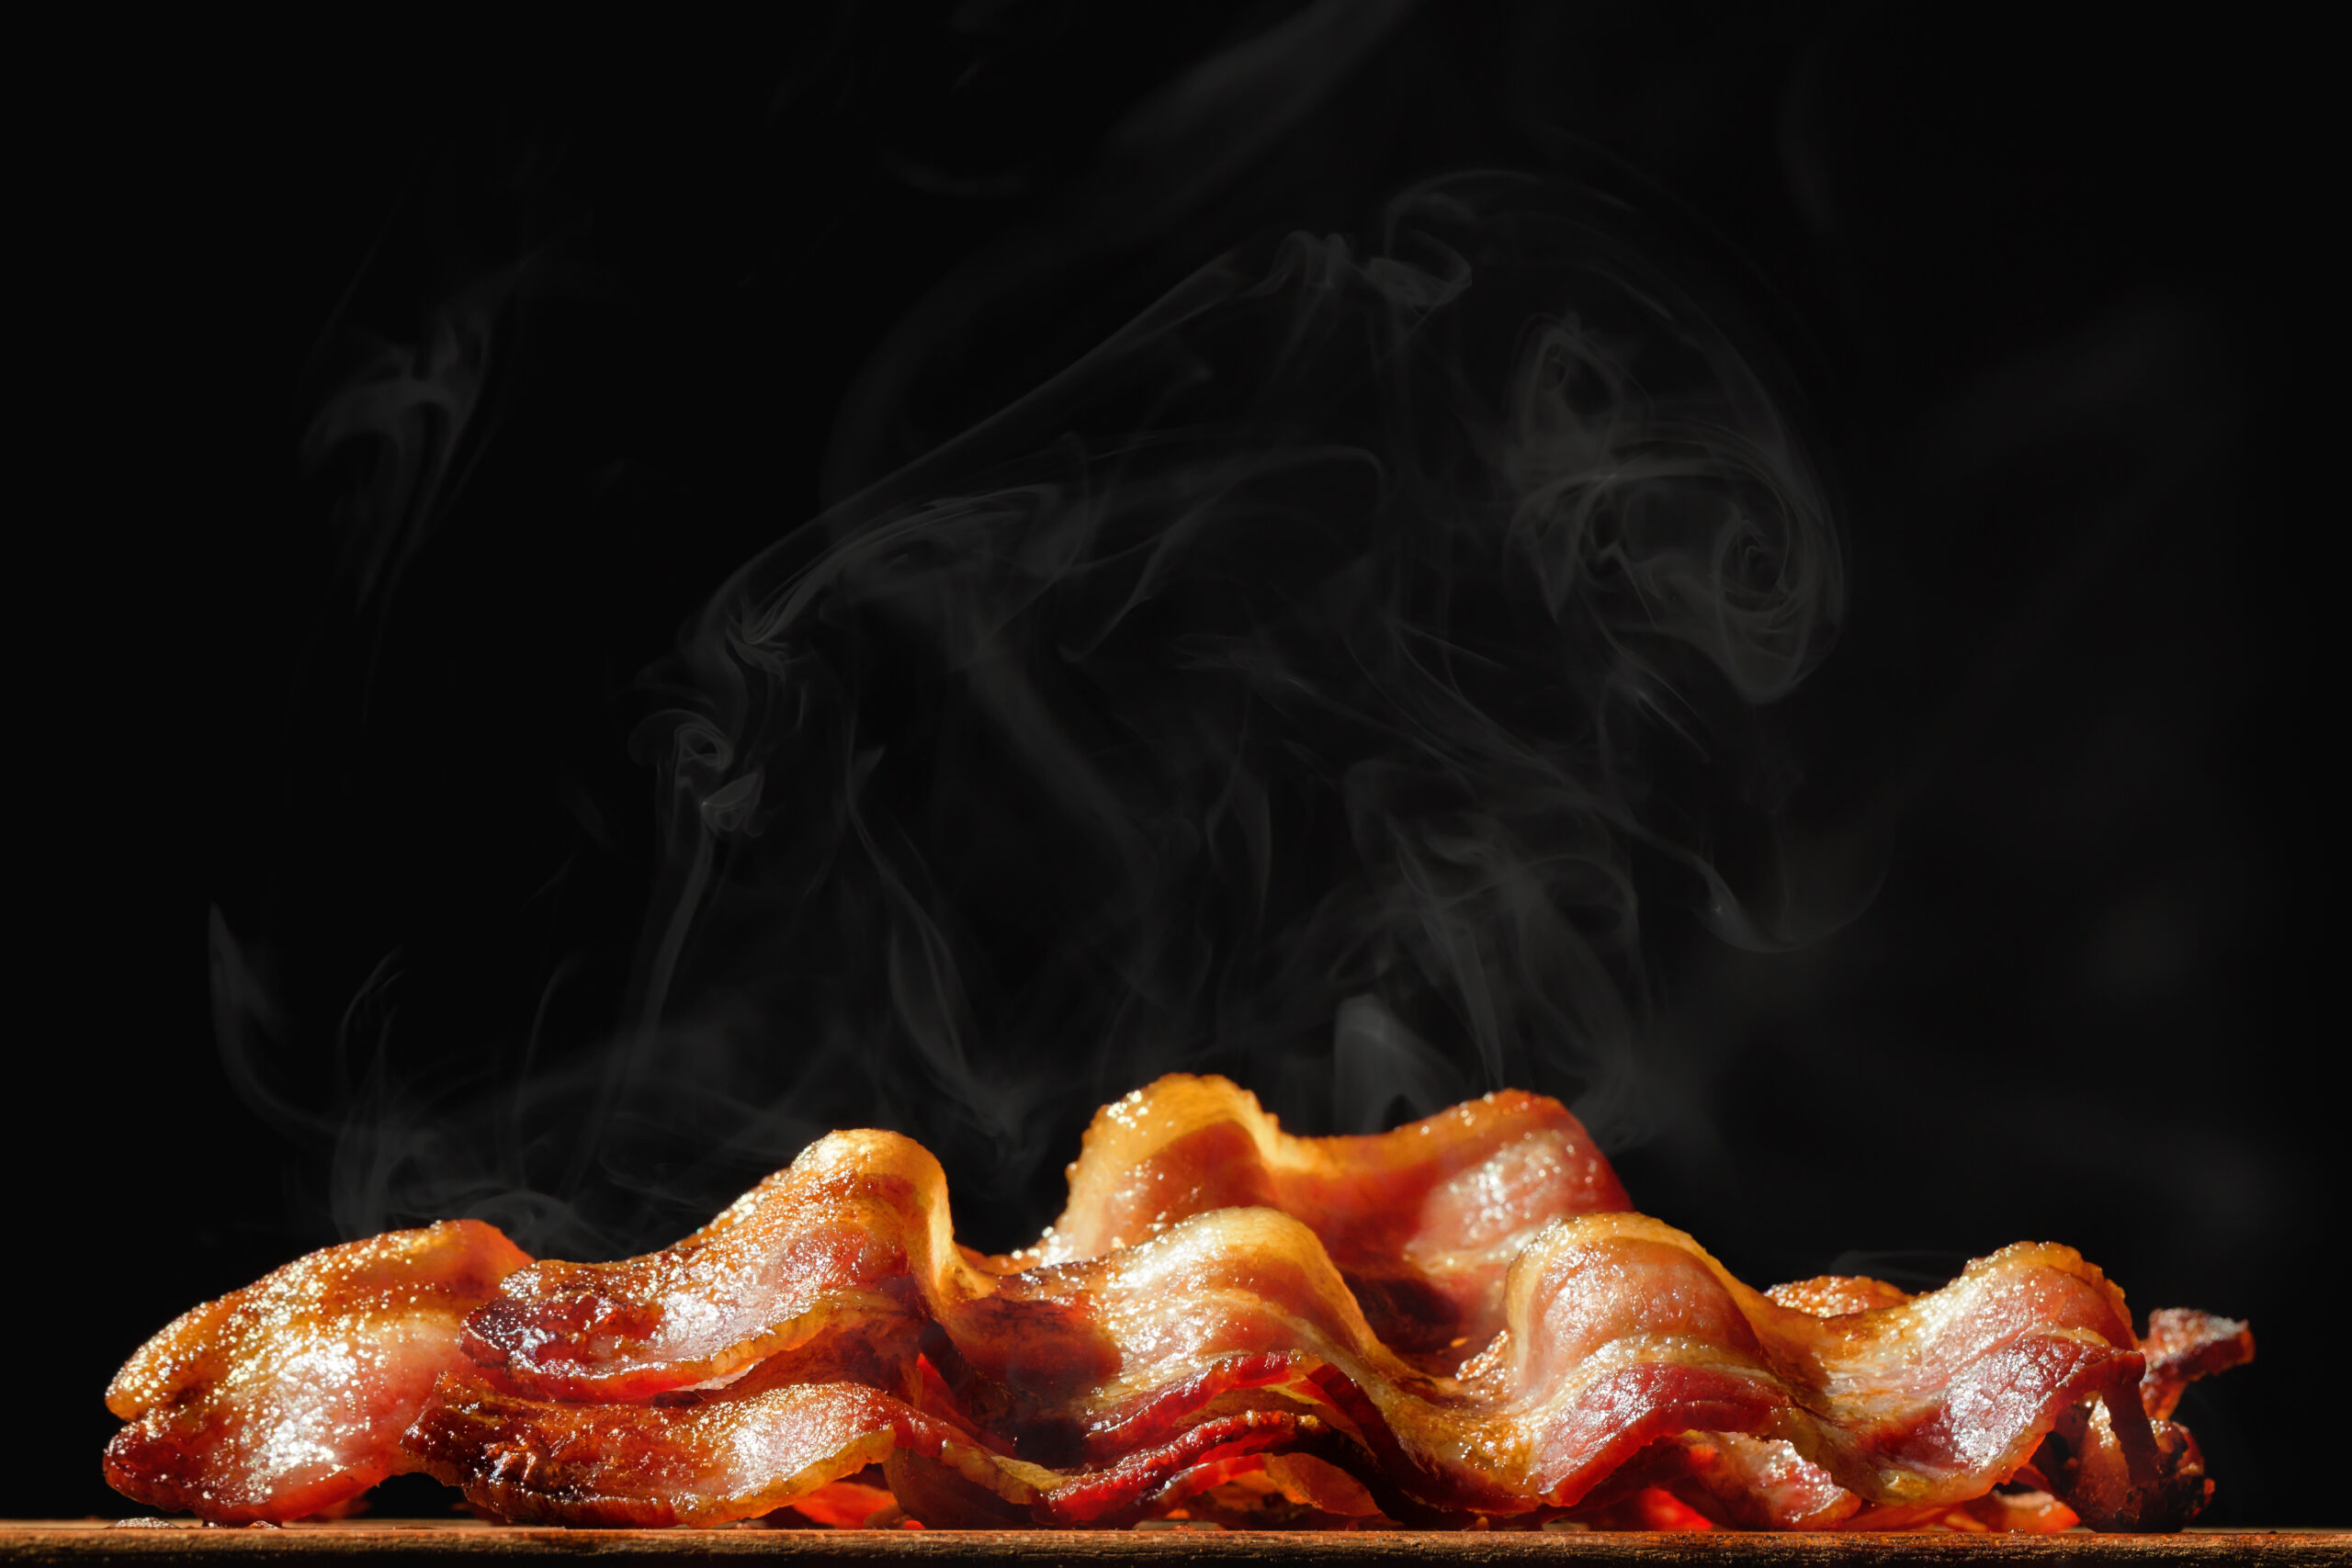 Pile of steaming hot freshly cooked bacon with room for text in black background